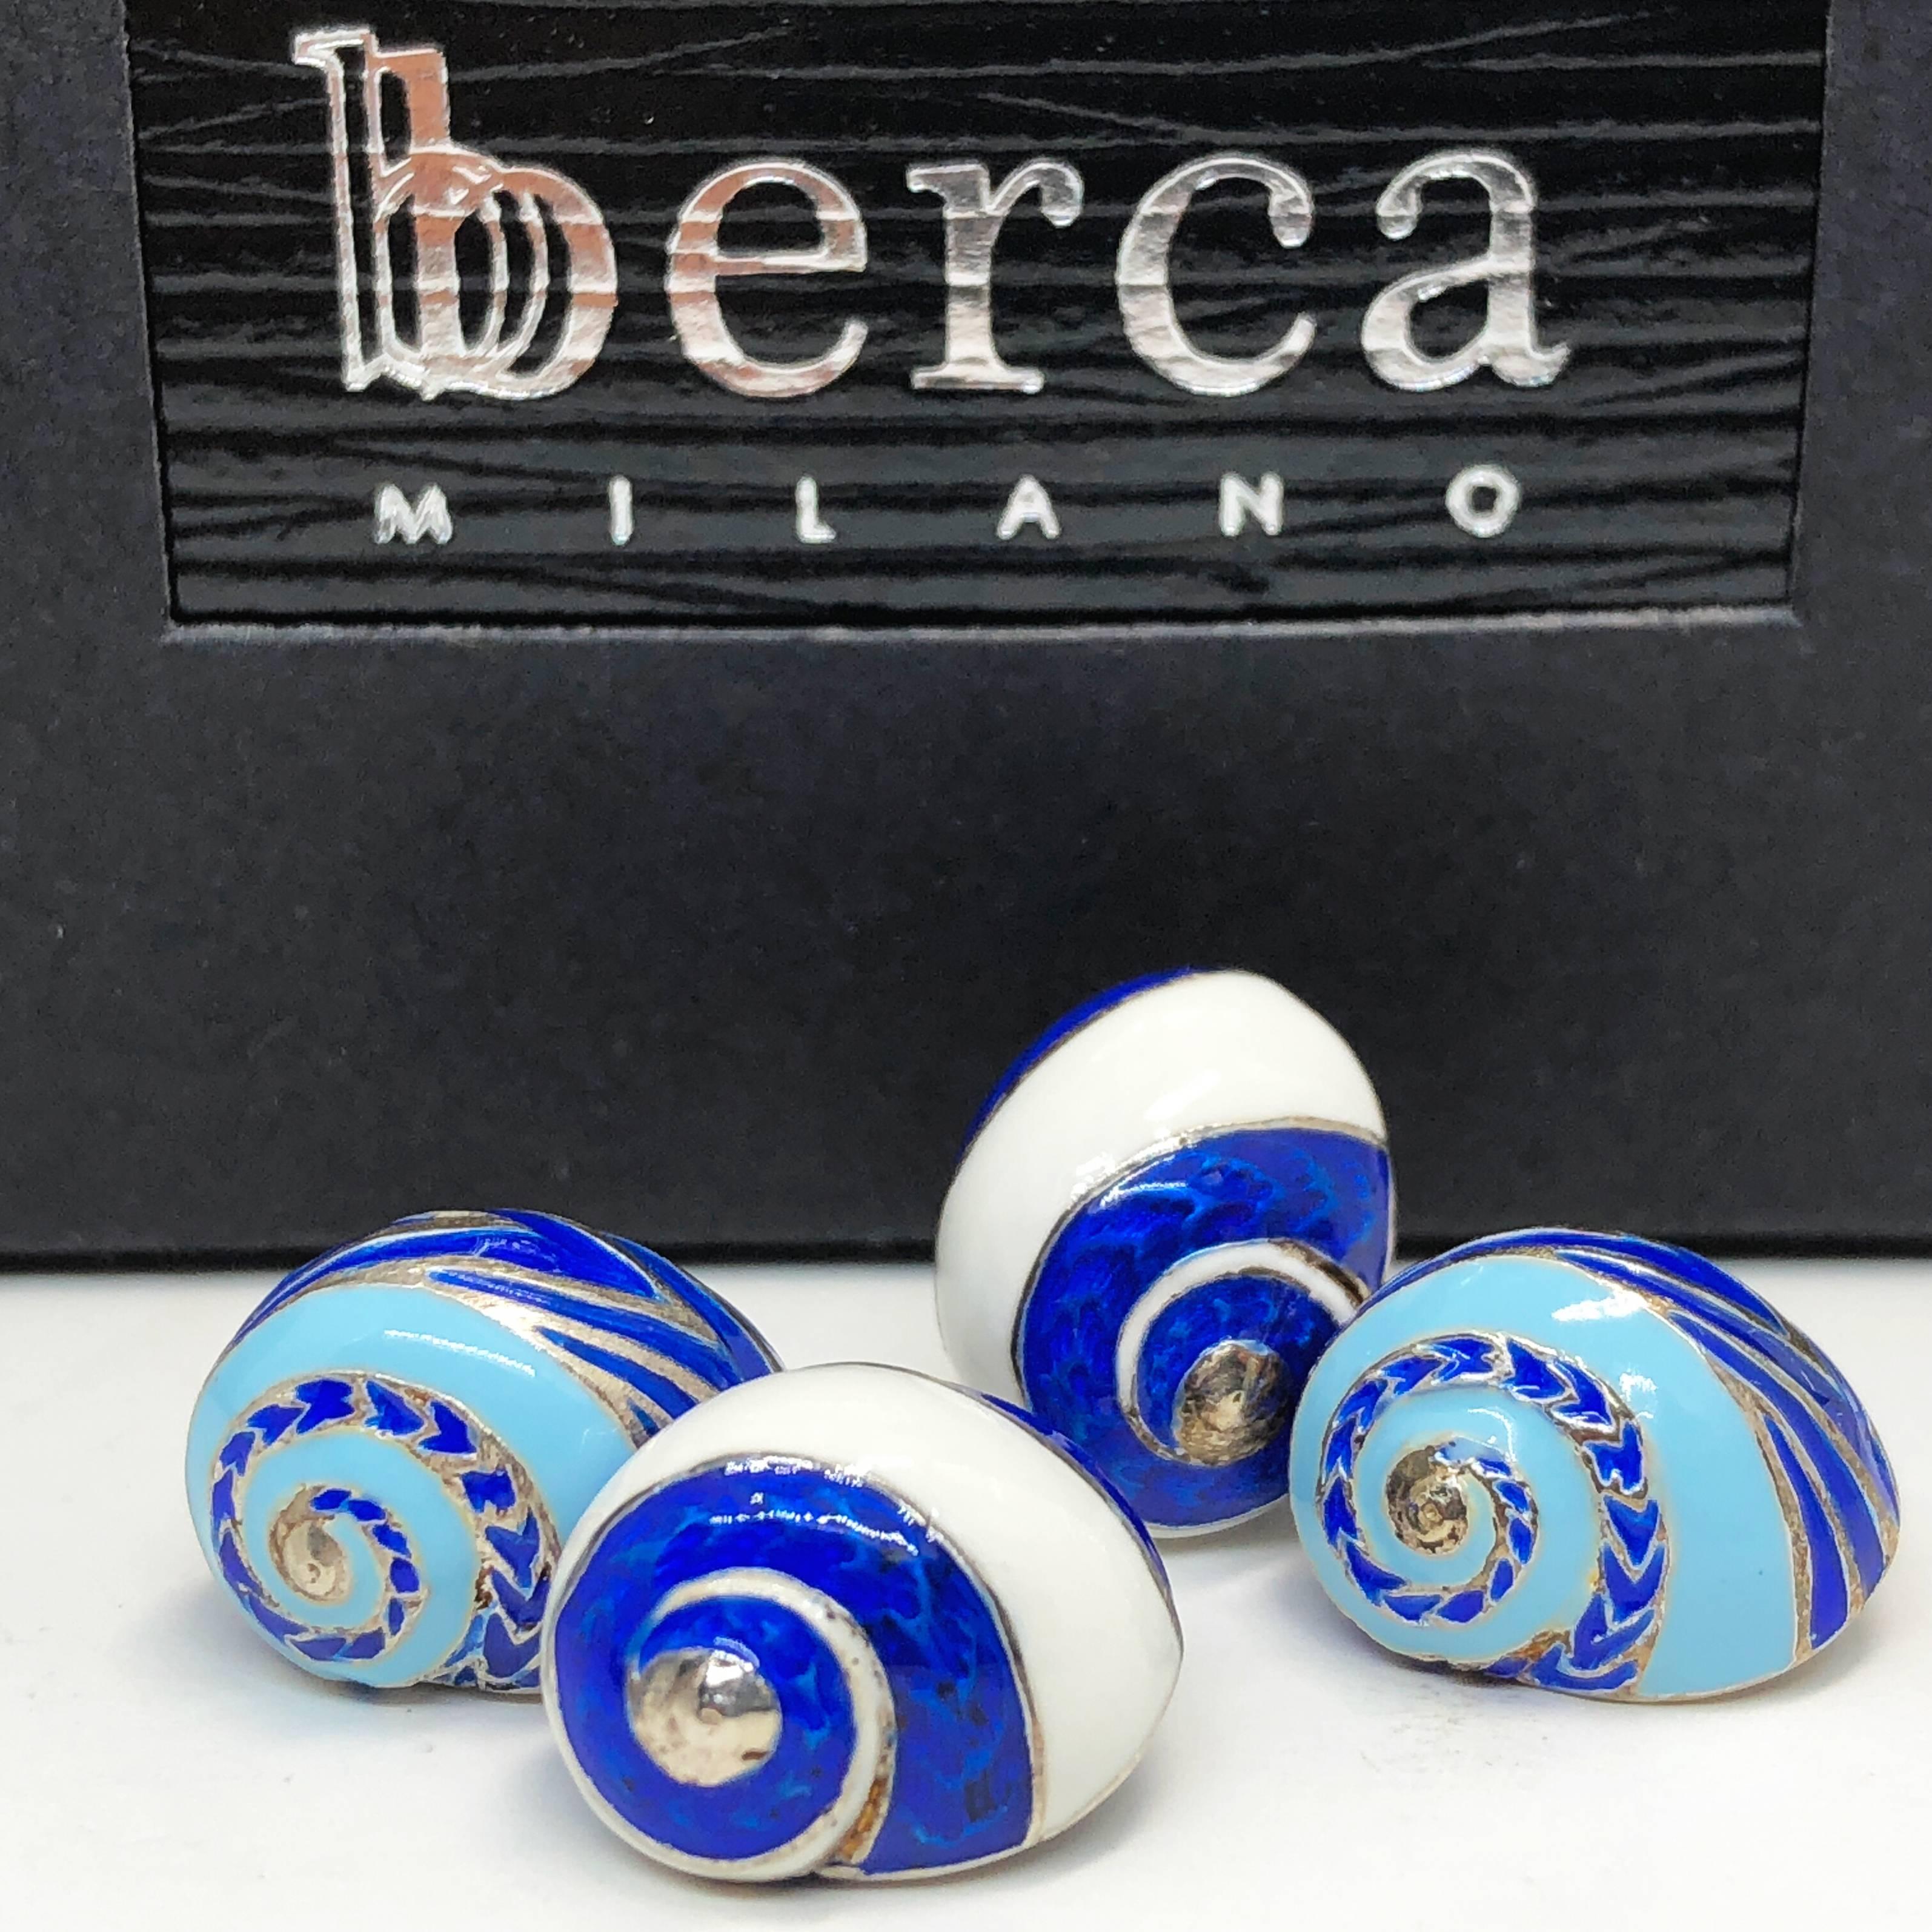 Unique white, blue, light blue hand enamelled seashell shaped sterling silver cufflinks
Shells size about 13x10mm